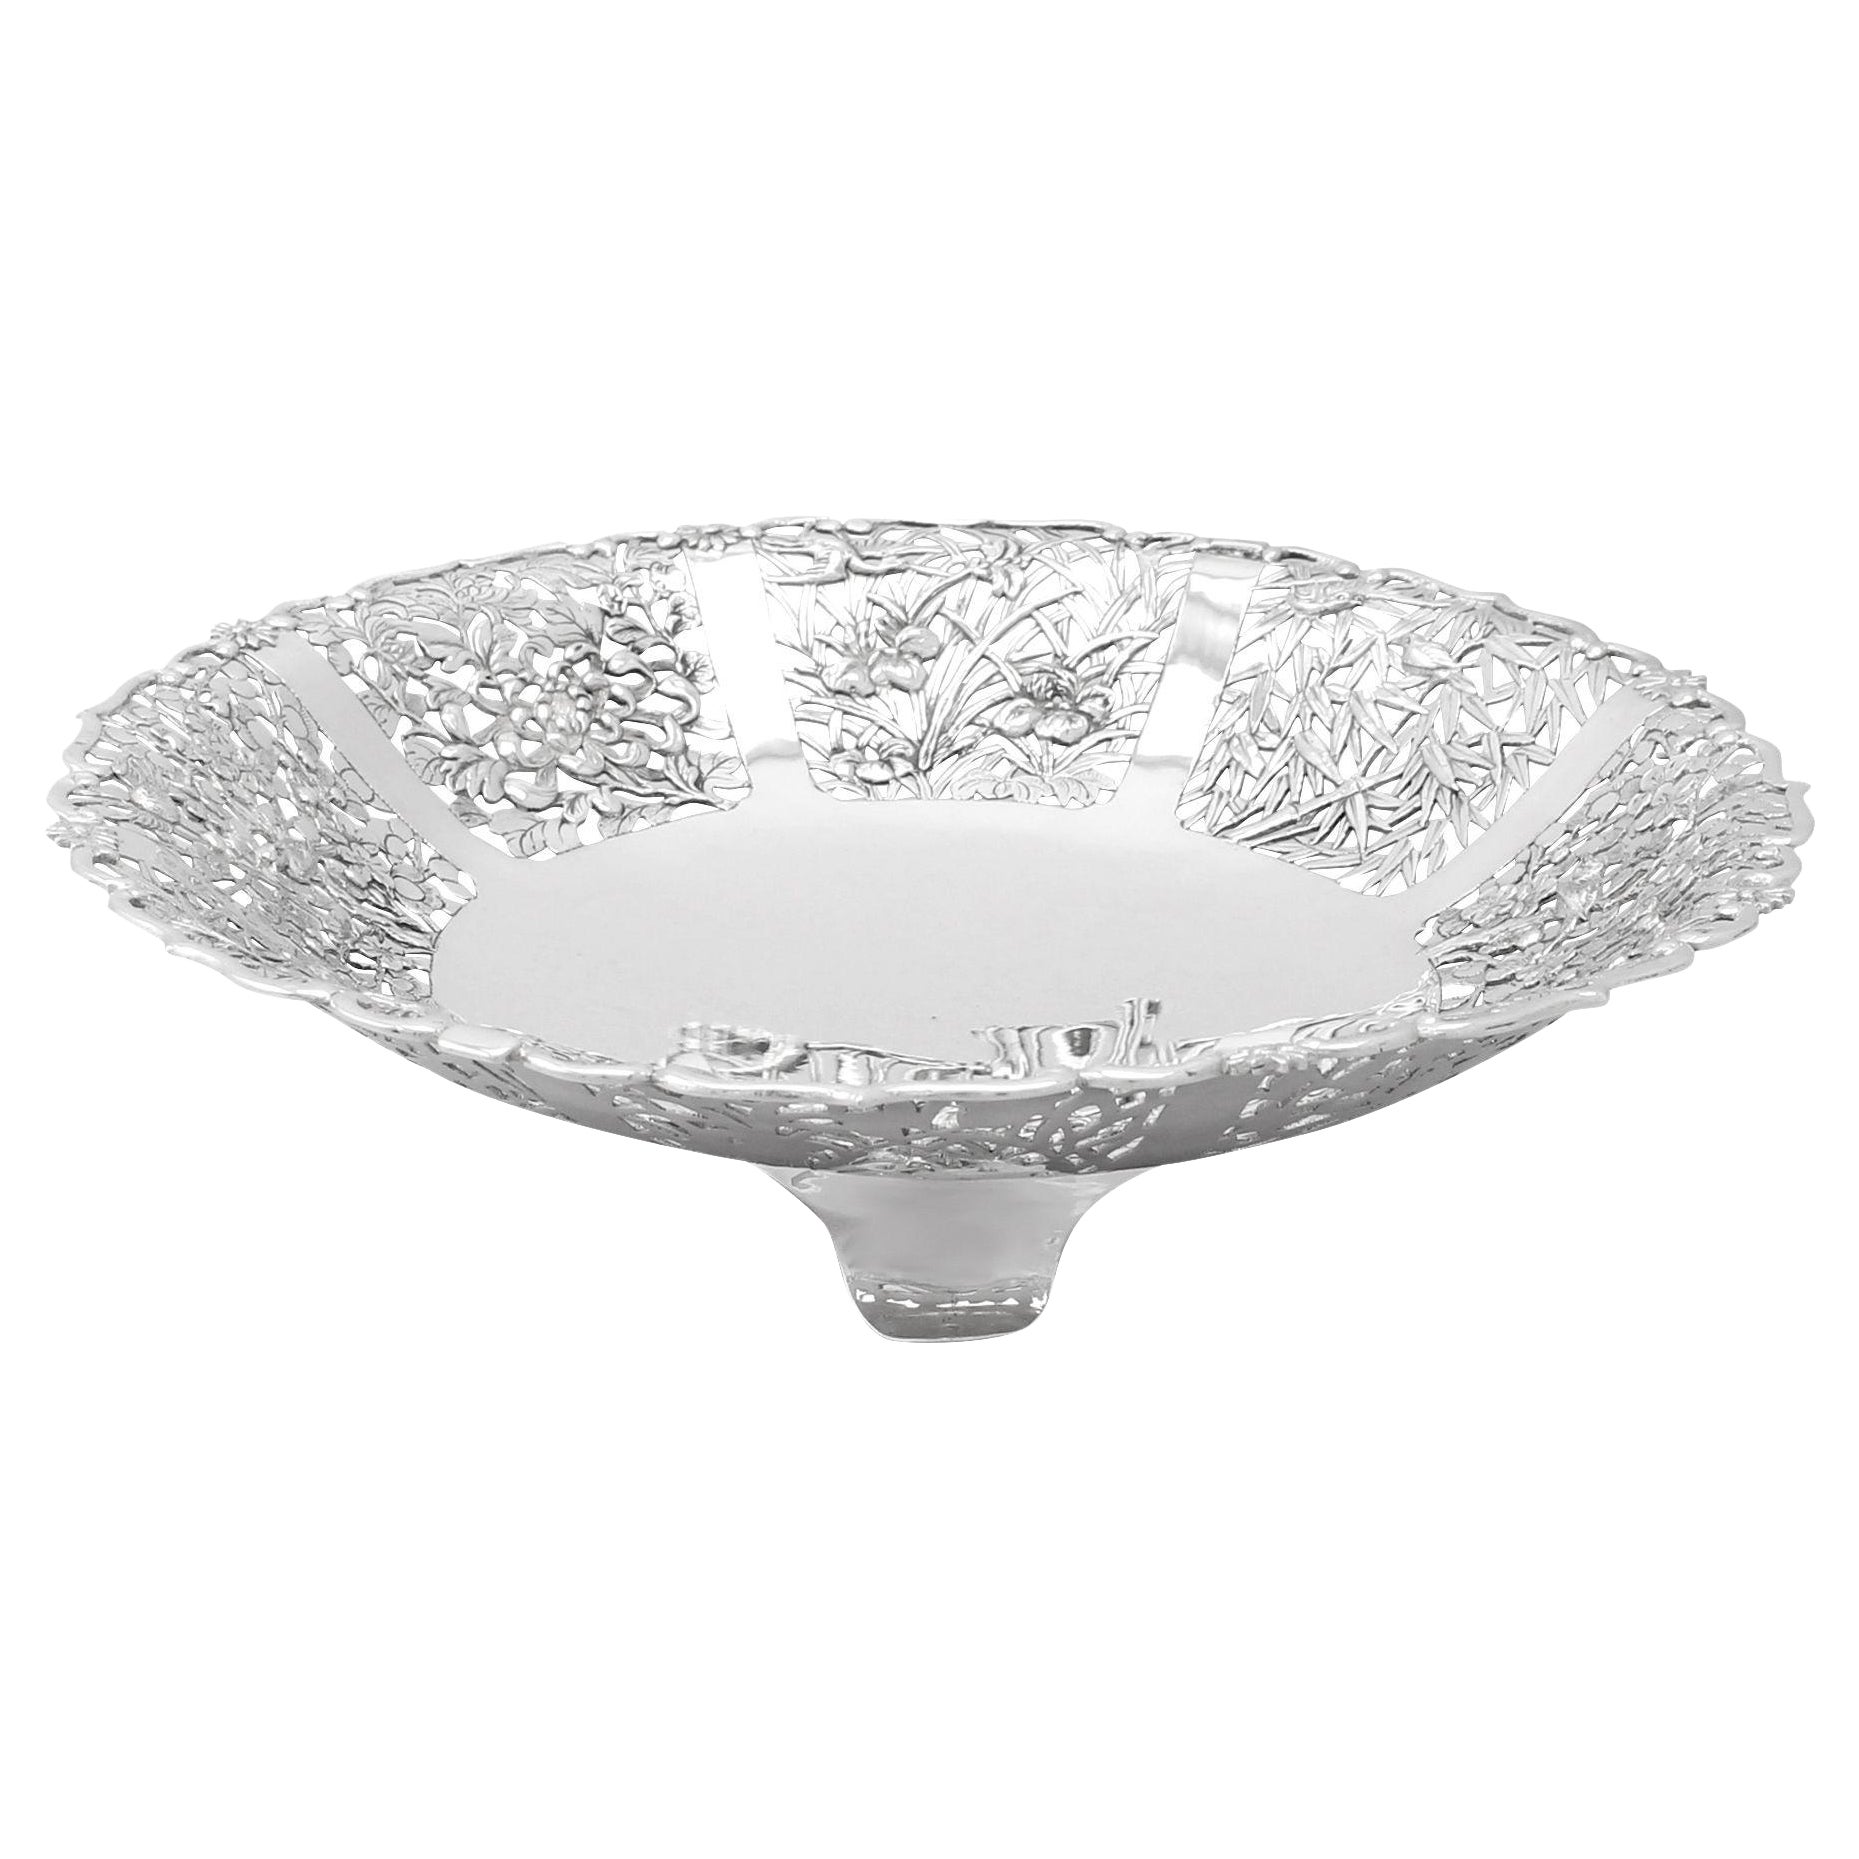 Antique 1880s Chinese Export Silver Fruit Dish For Sale